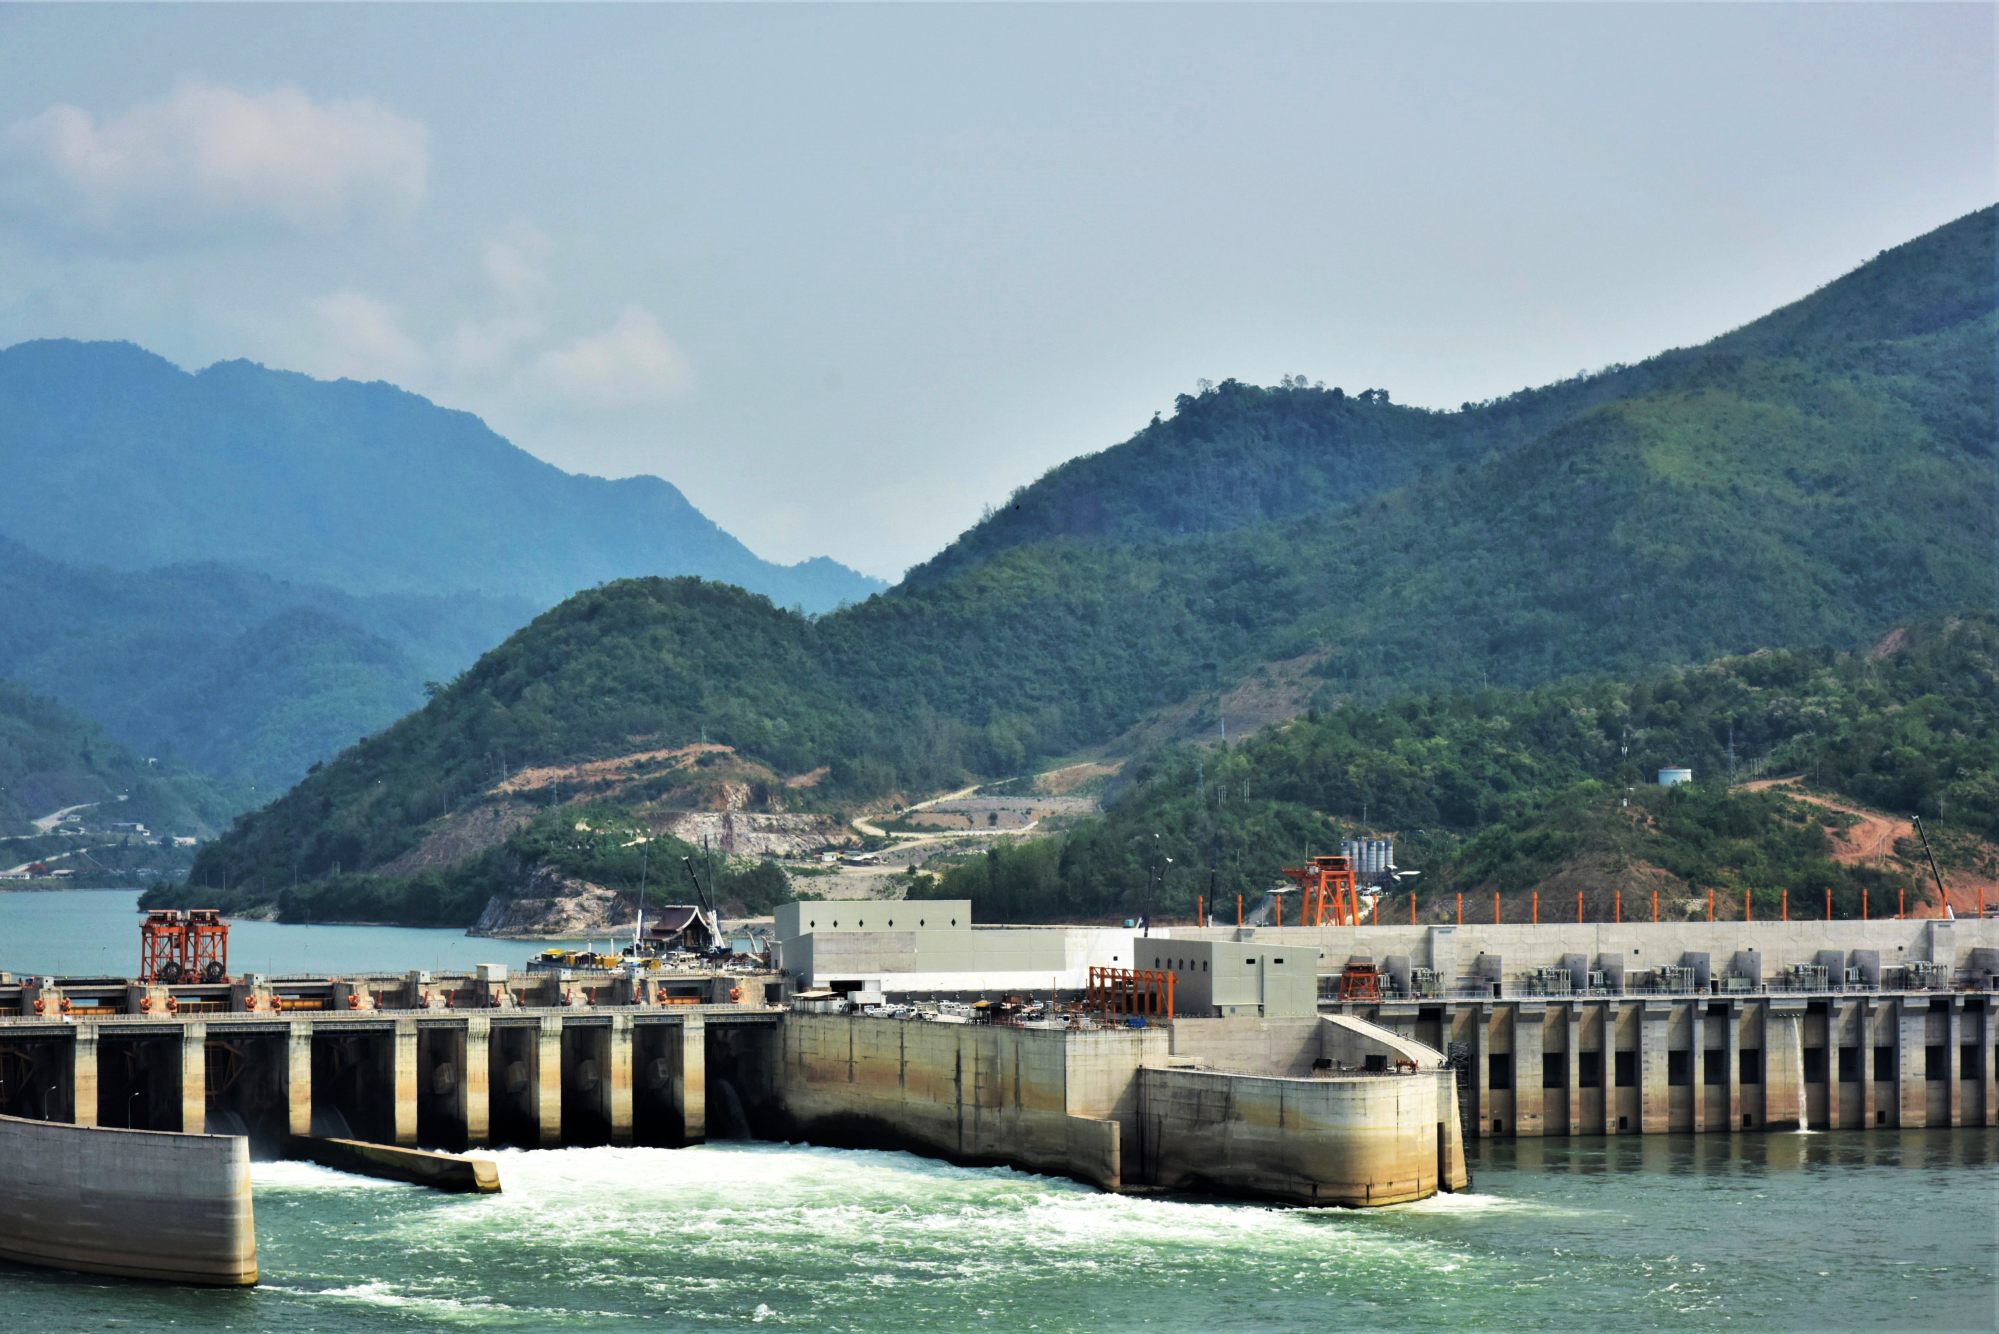 The Xayaburi dam. Fishers say this dam on the Lower Mekong has ruined their catch. Photo: Handout